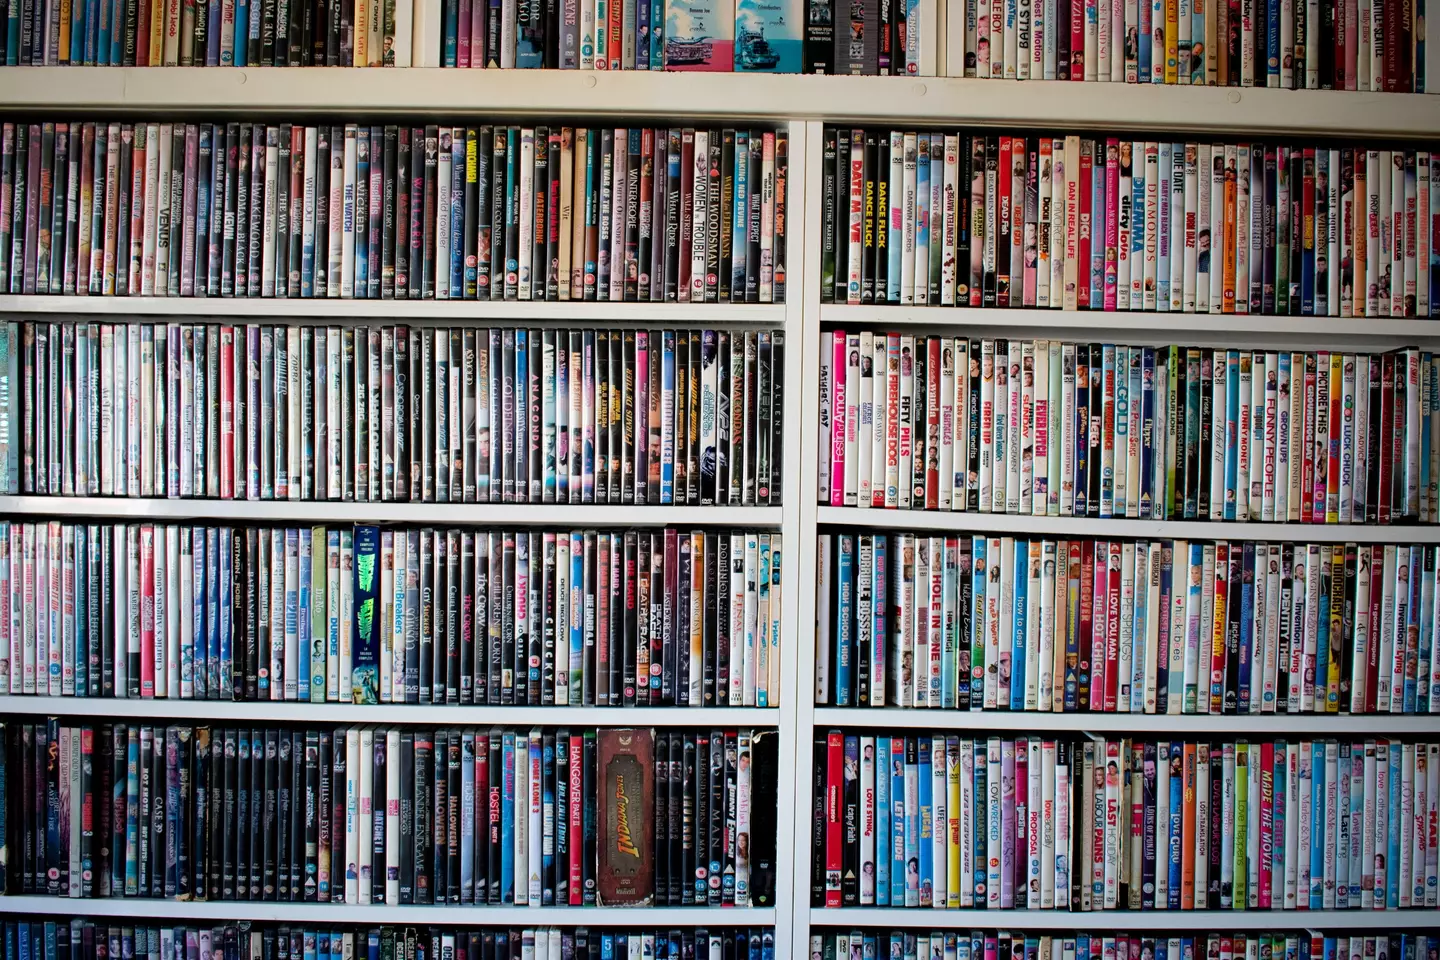 Your DVD collection could be worth a tonne of money.